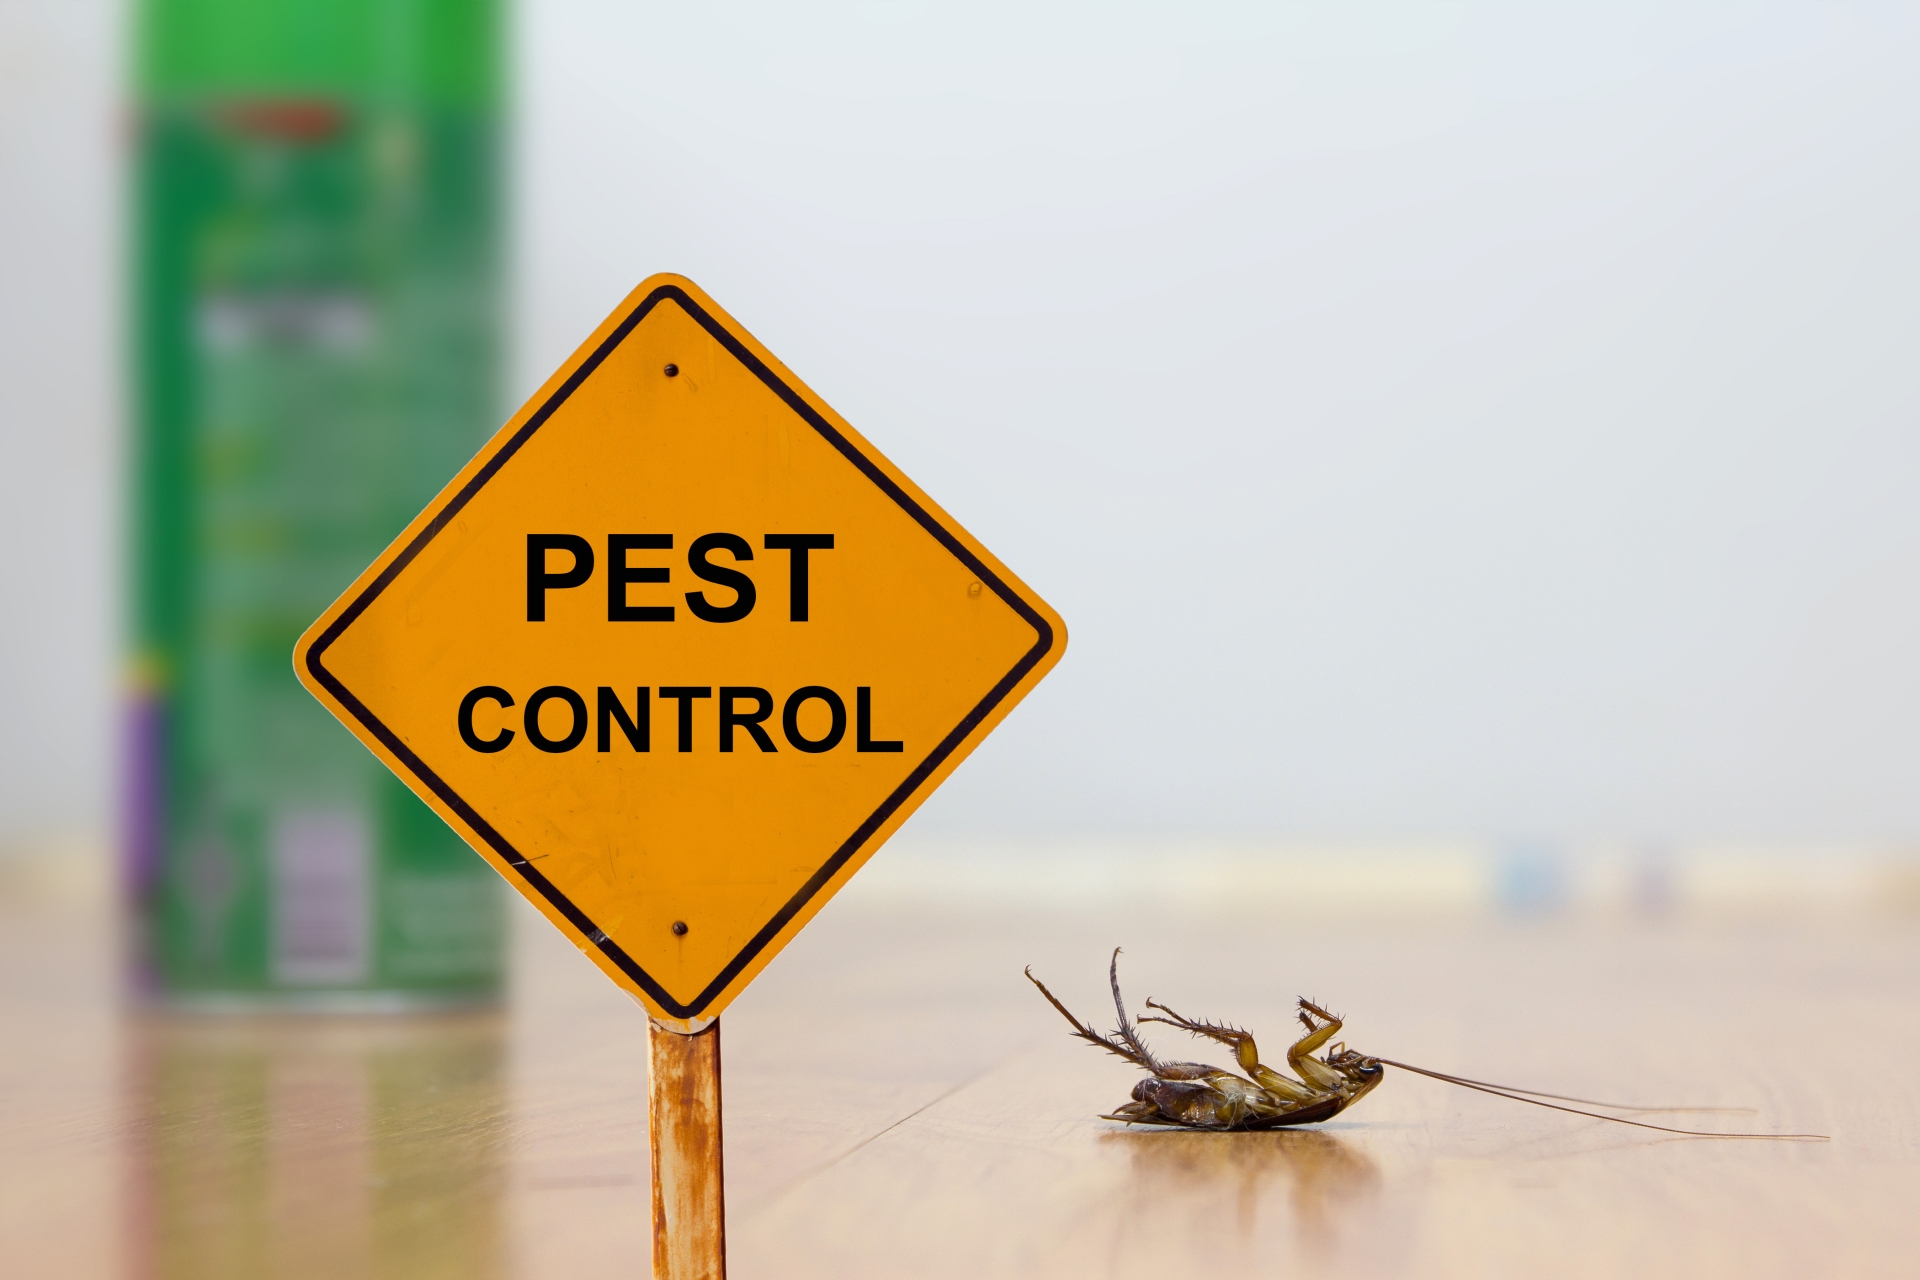 24 Hour Pest Control, Pest Control in Brompton, SW3. Call Now 020 8166 9746